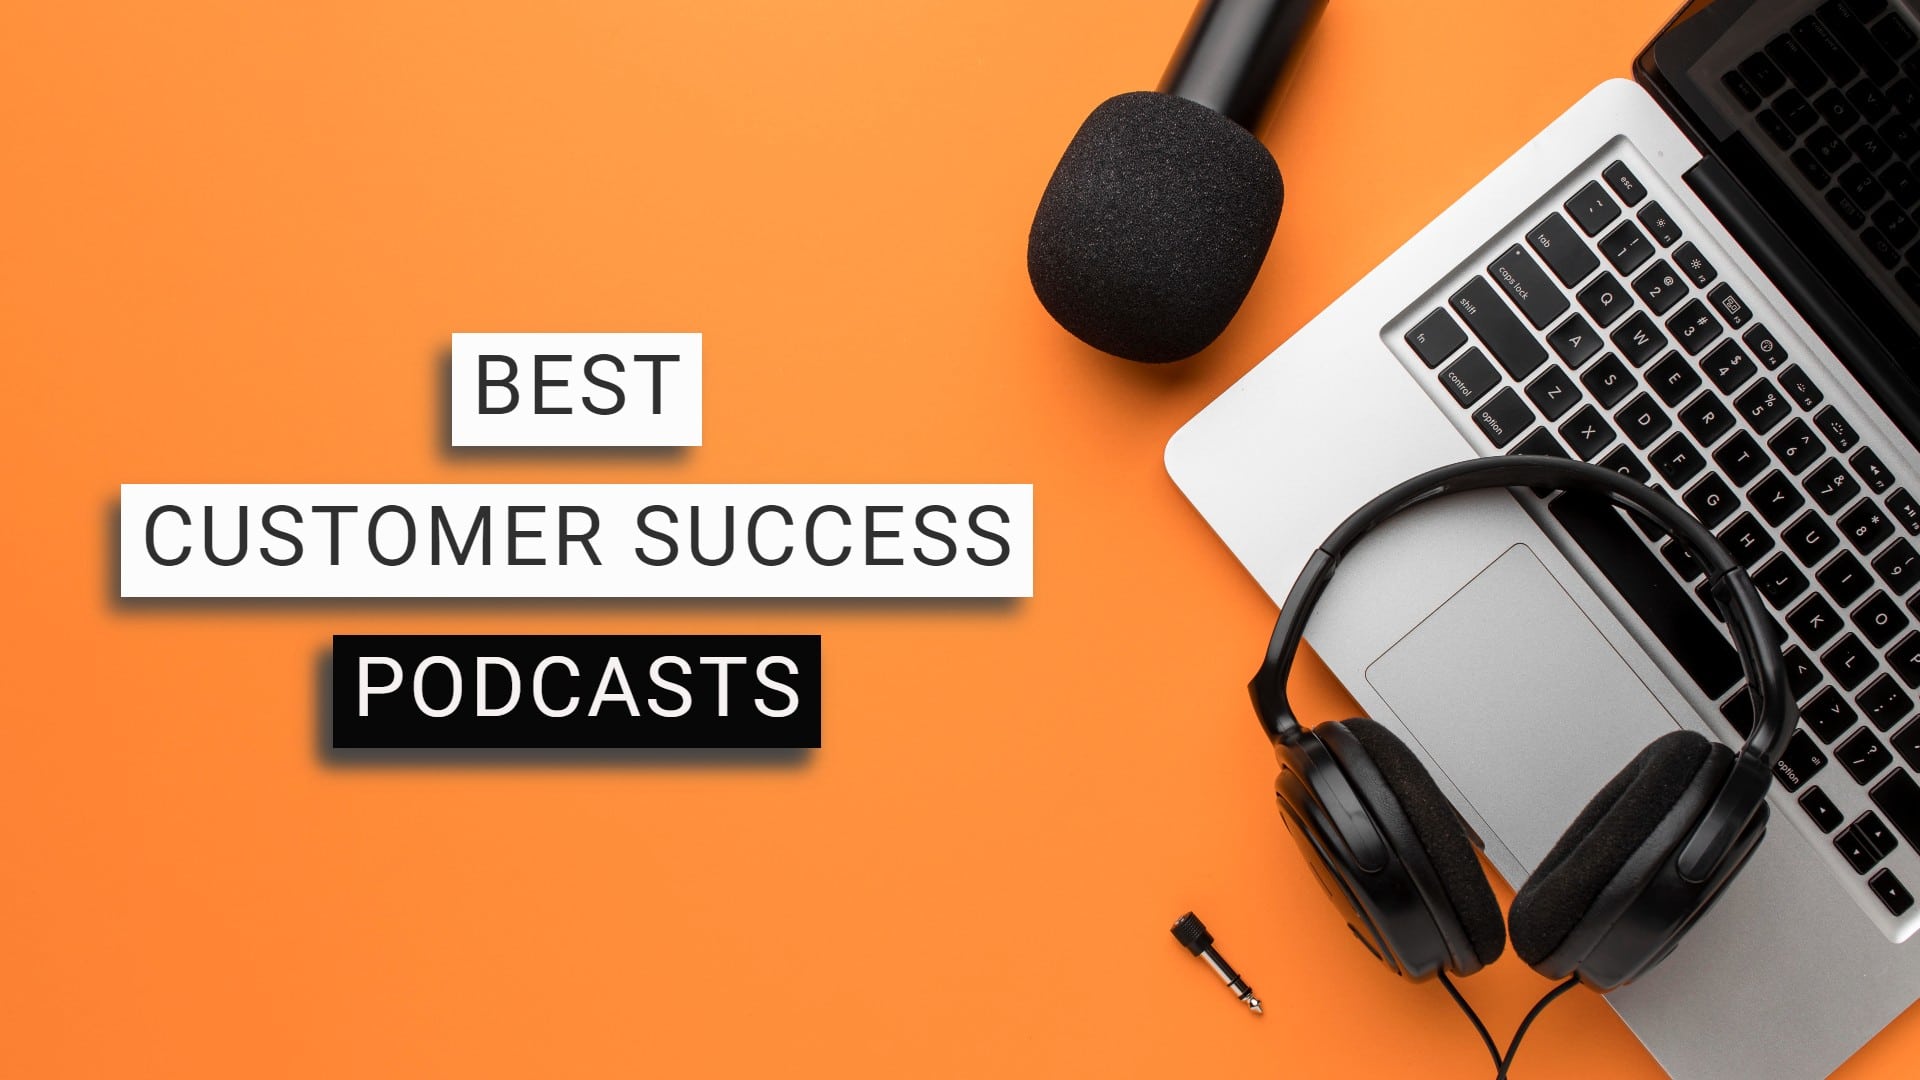 The 15 Best Customer Success Podcasts to Grow Your Career | 2022 List